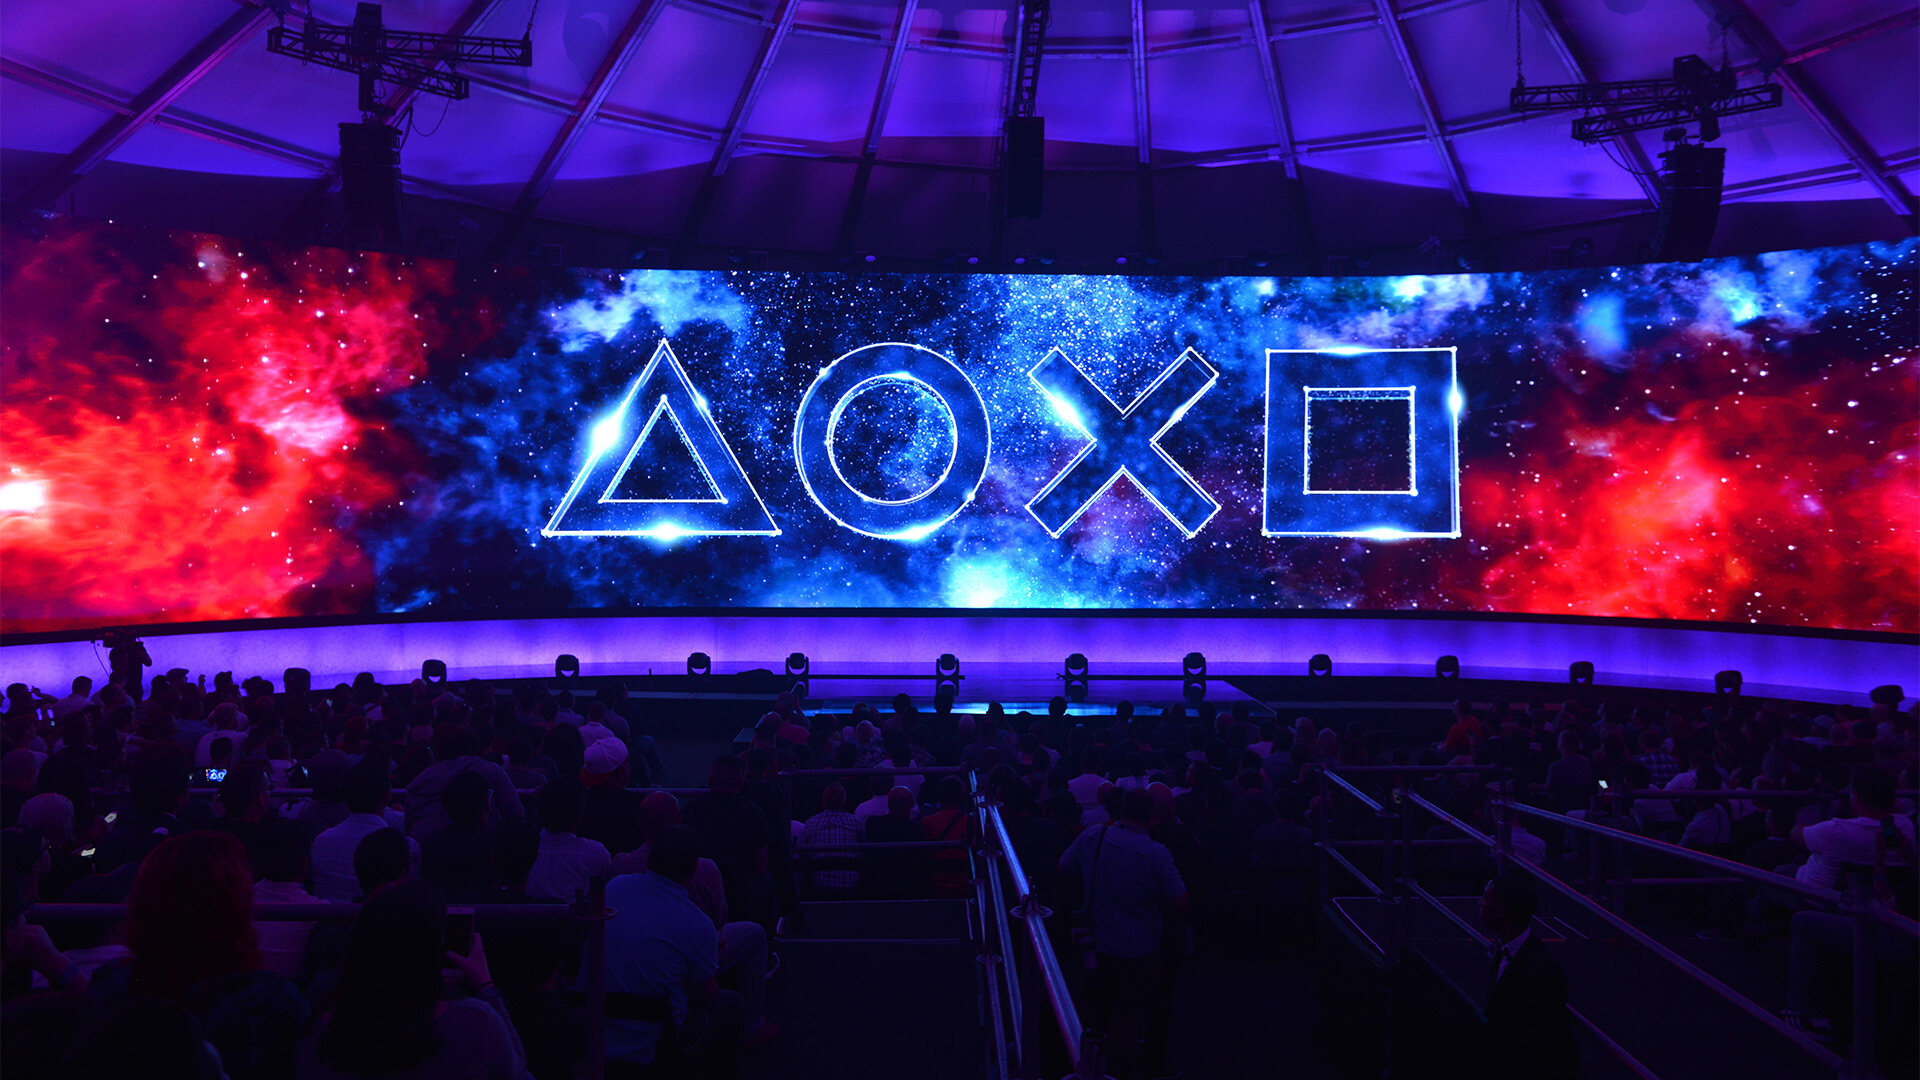 Breaking-Sony-confirms-that-they-will-not-attend-E3-2020.jpg